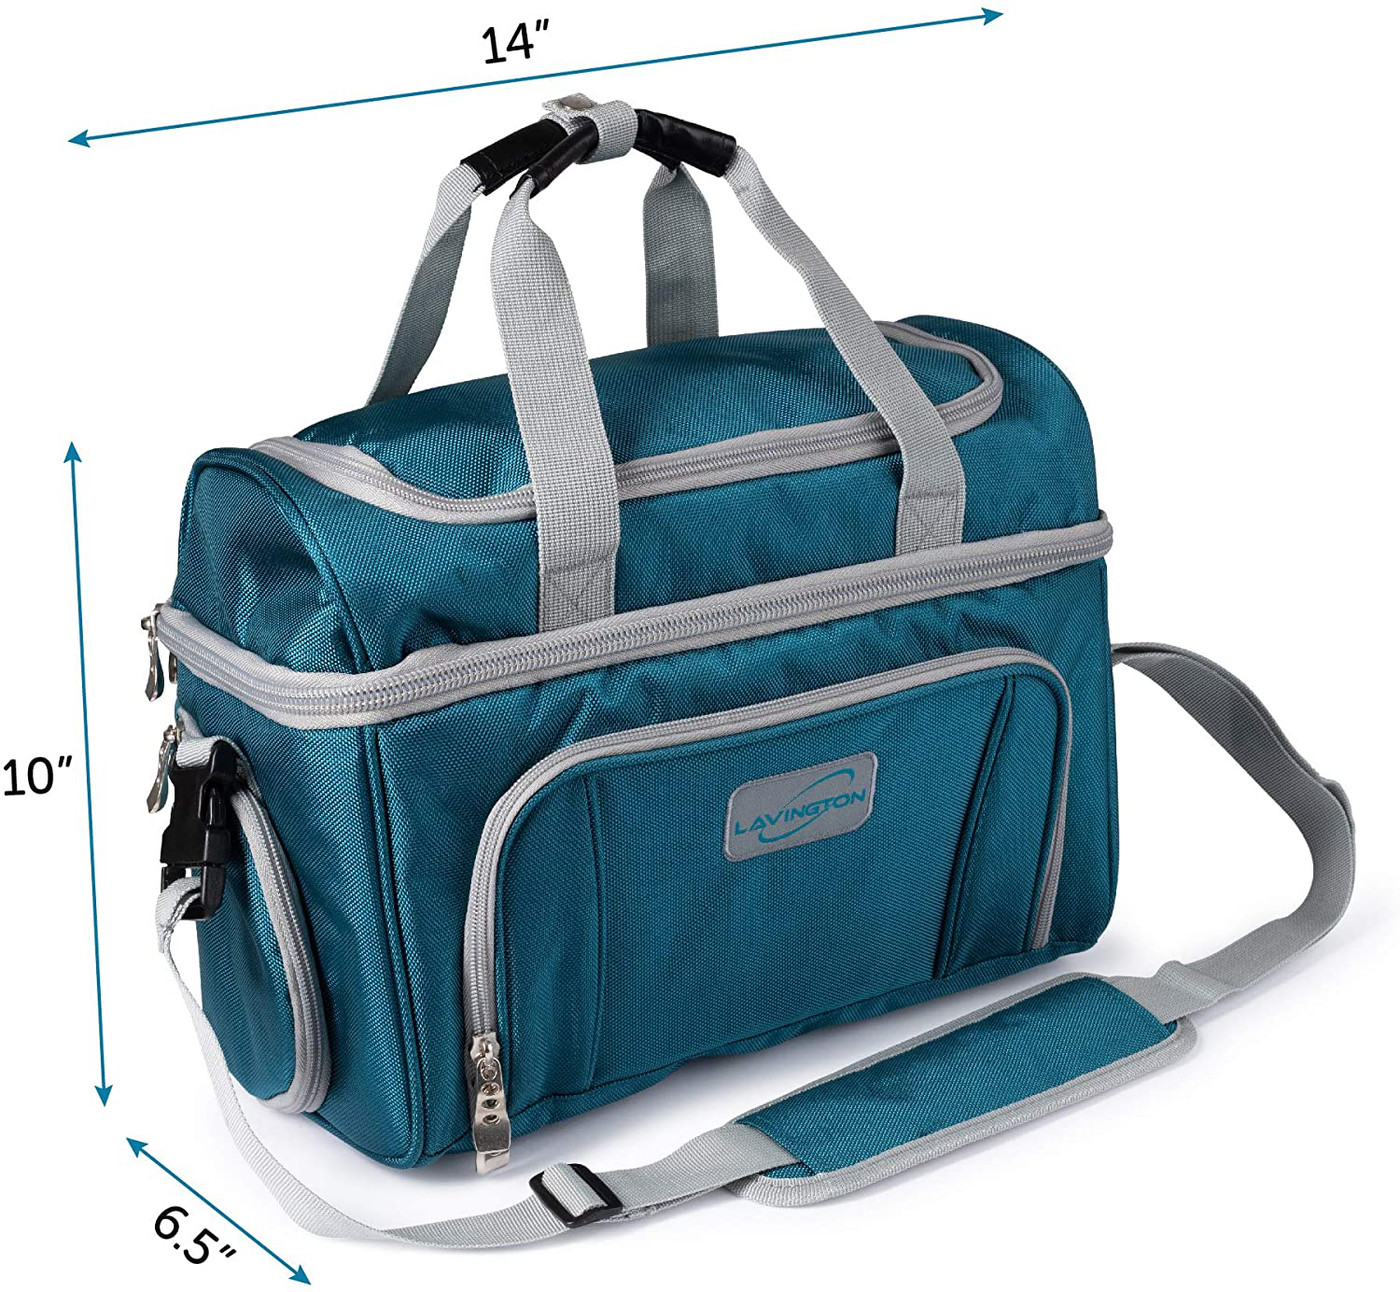 Lunch box For Men Insulated cooler Lunch bag w/ 3 compartment - Detachable Shoulder Strap + 2 Ice Packs. Strong SBS Zippers Great gifts For Men (Teal, Large)